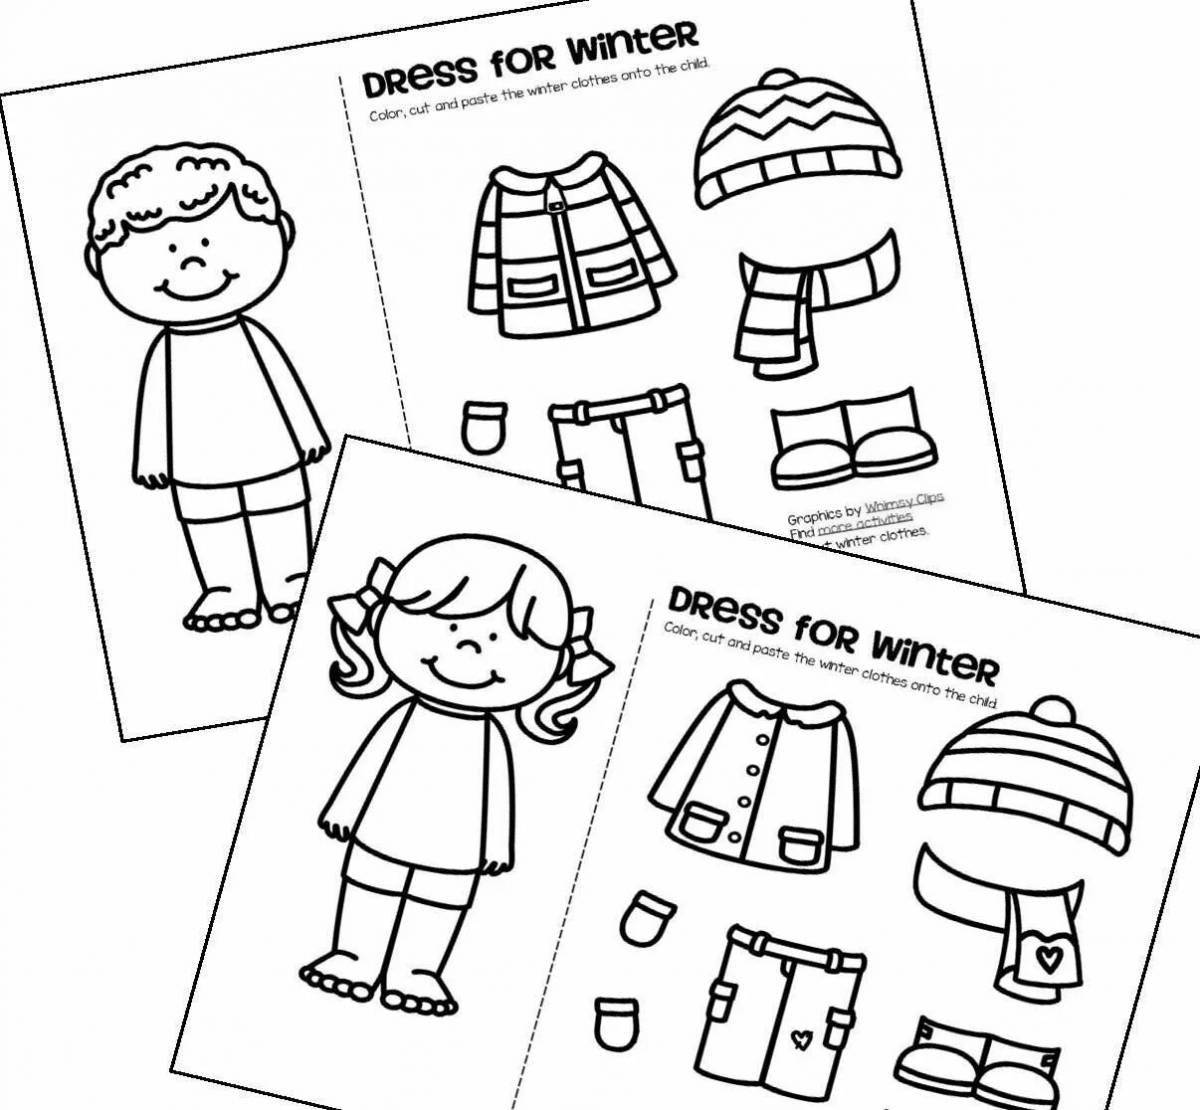 Adventure clothing coloring page for 4-5 year olds